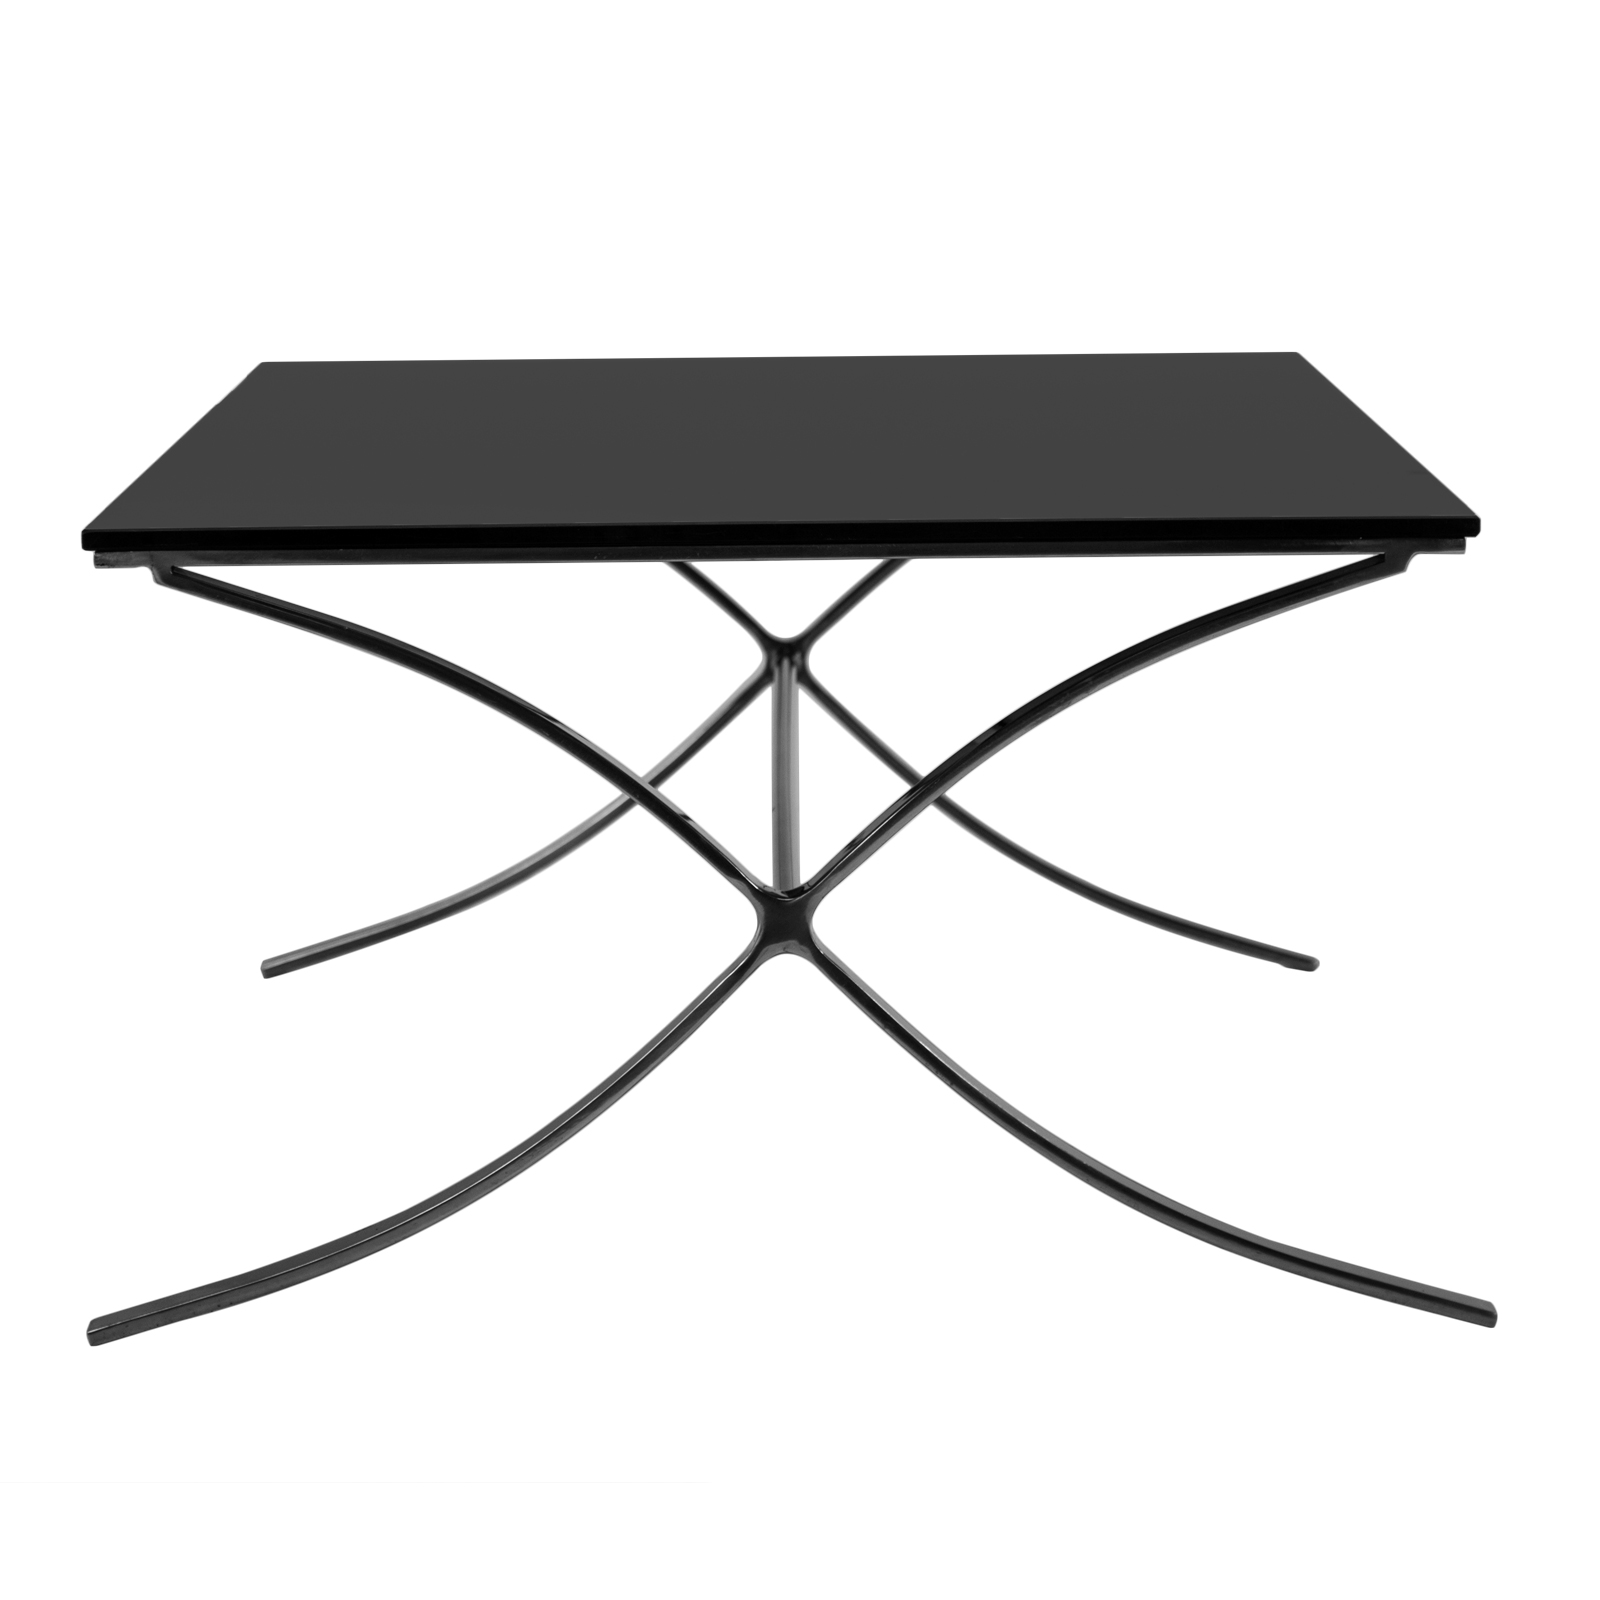 Barcelona Coffee Table Rentals | Event Furniture Rental | Delivery ...